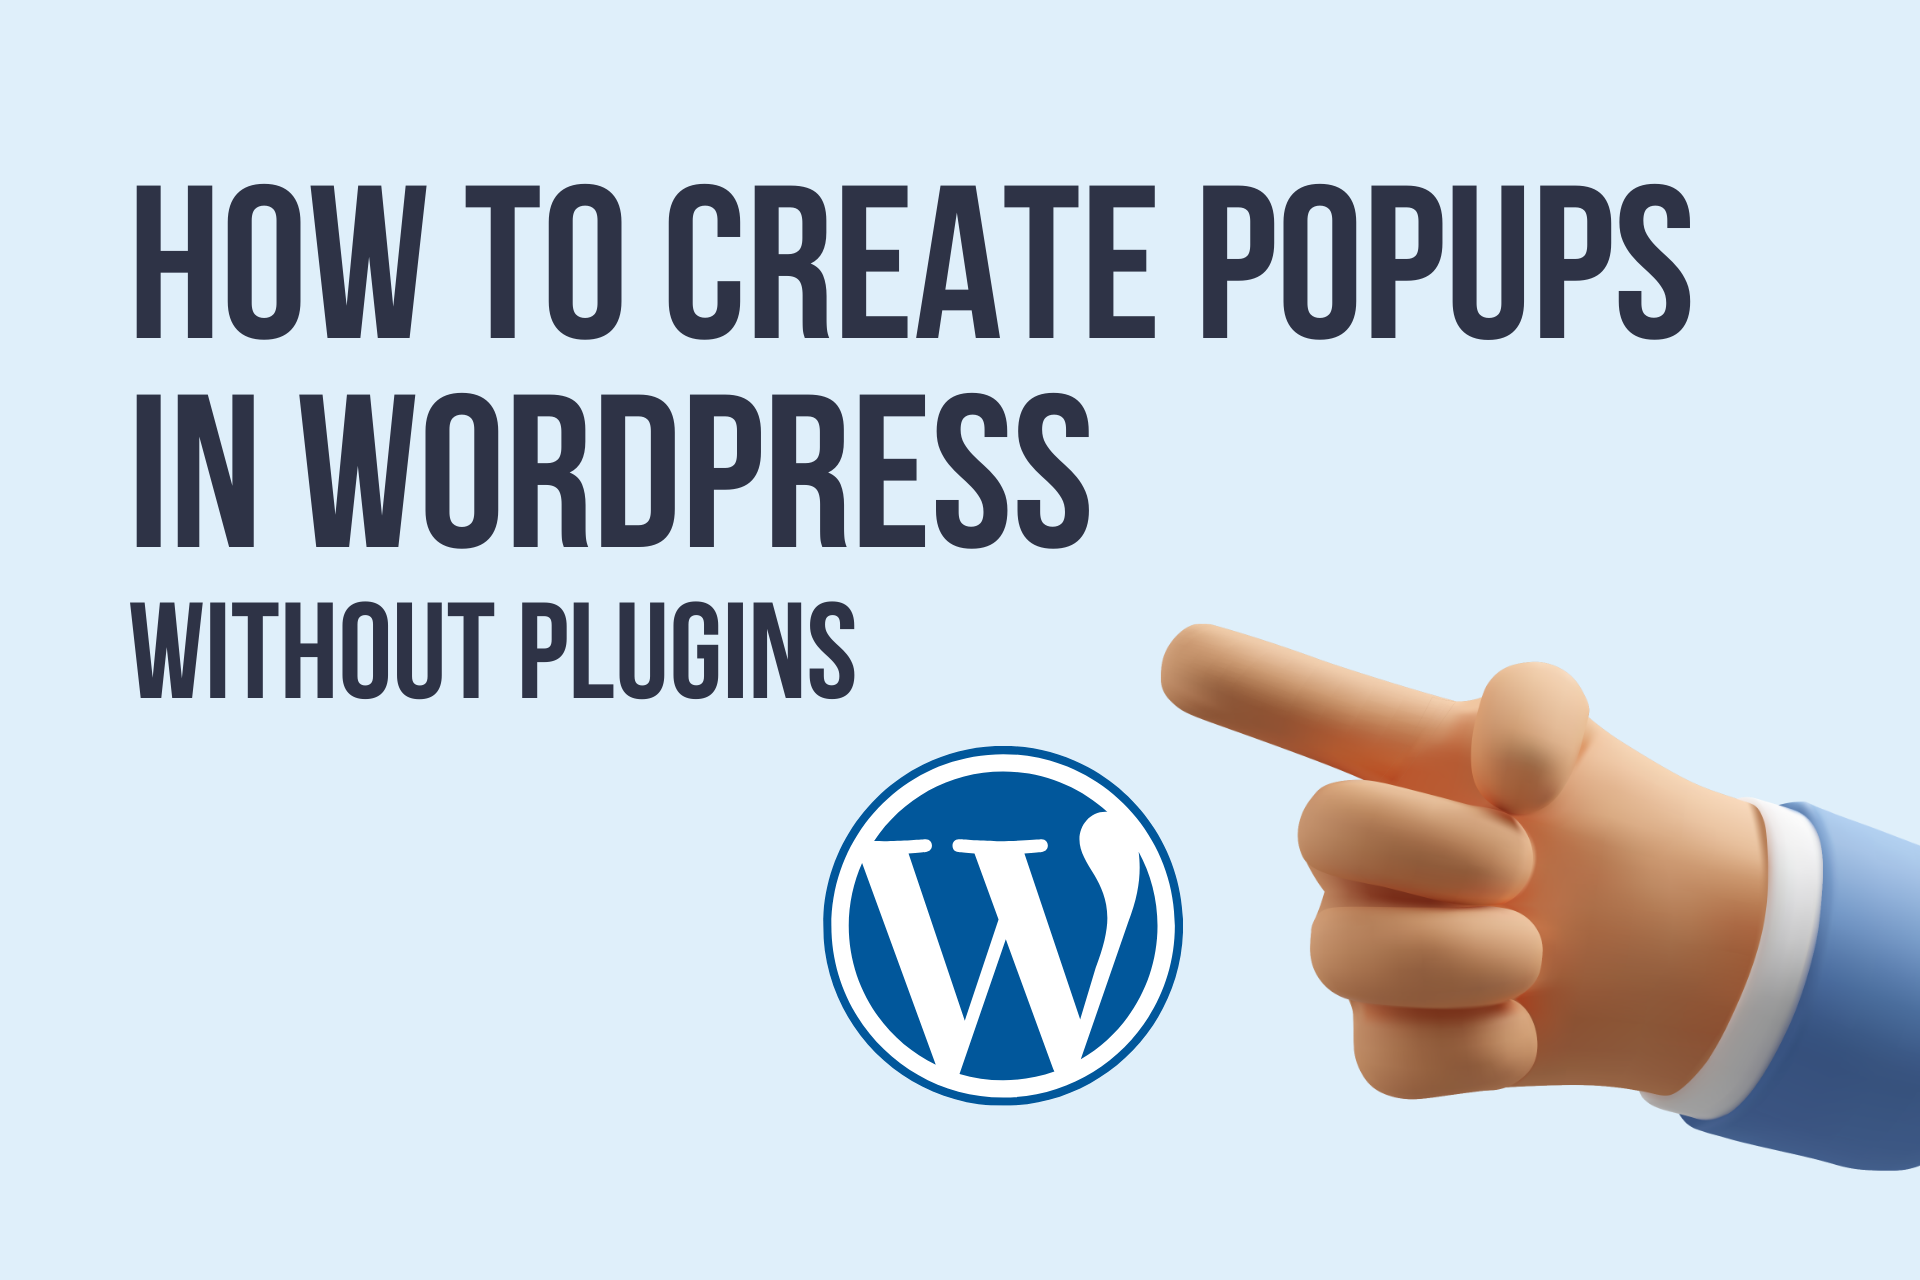 How to Create Popup in WordPress Without Plugin?